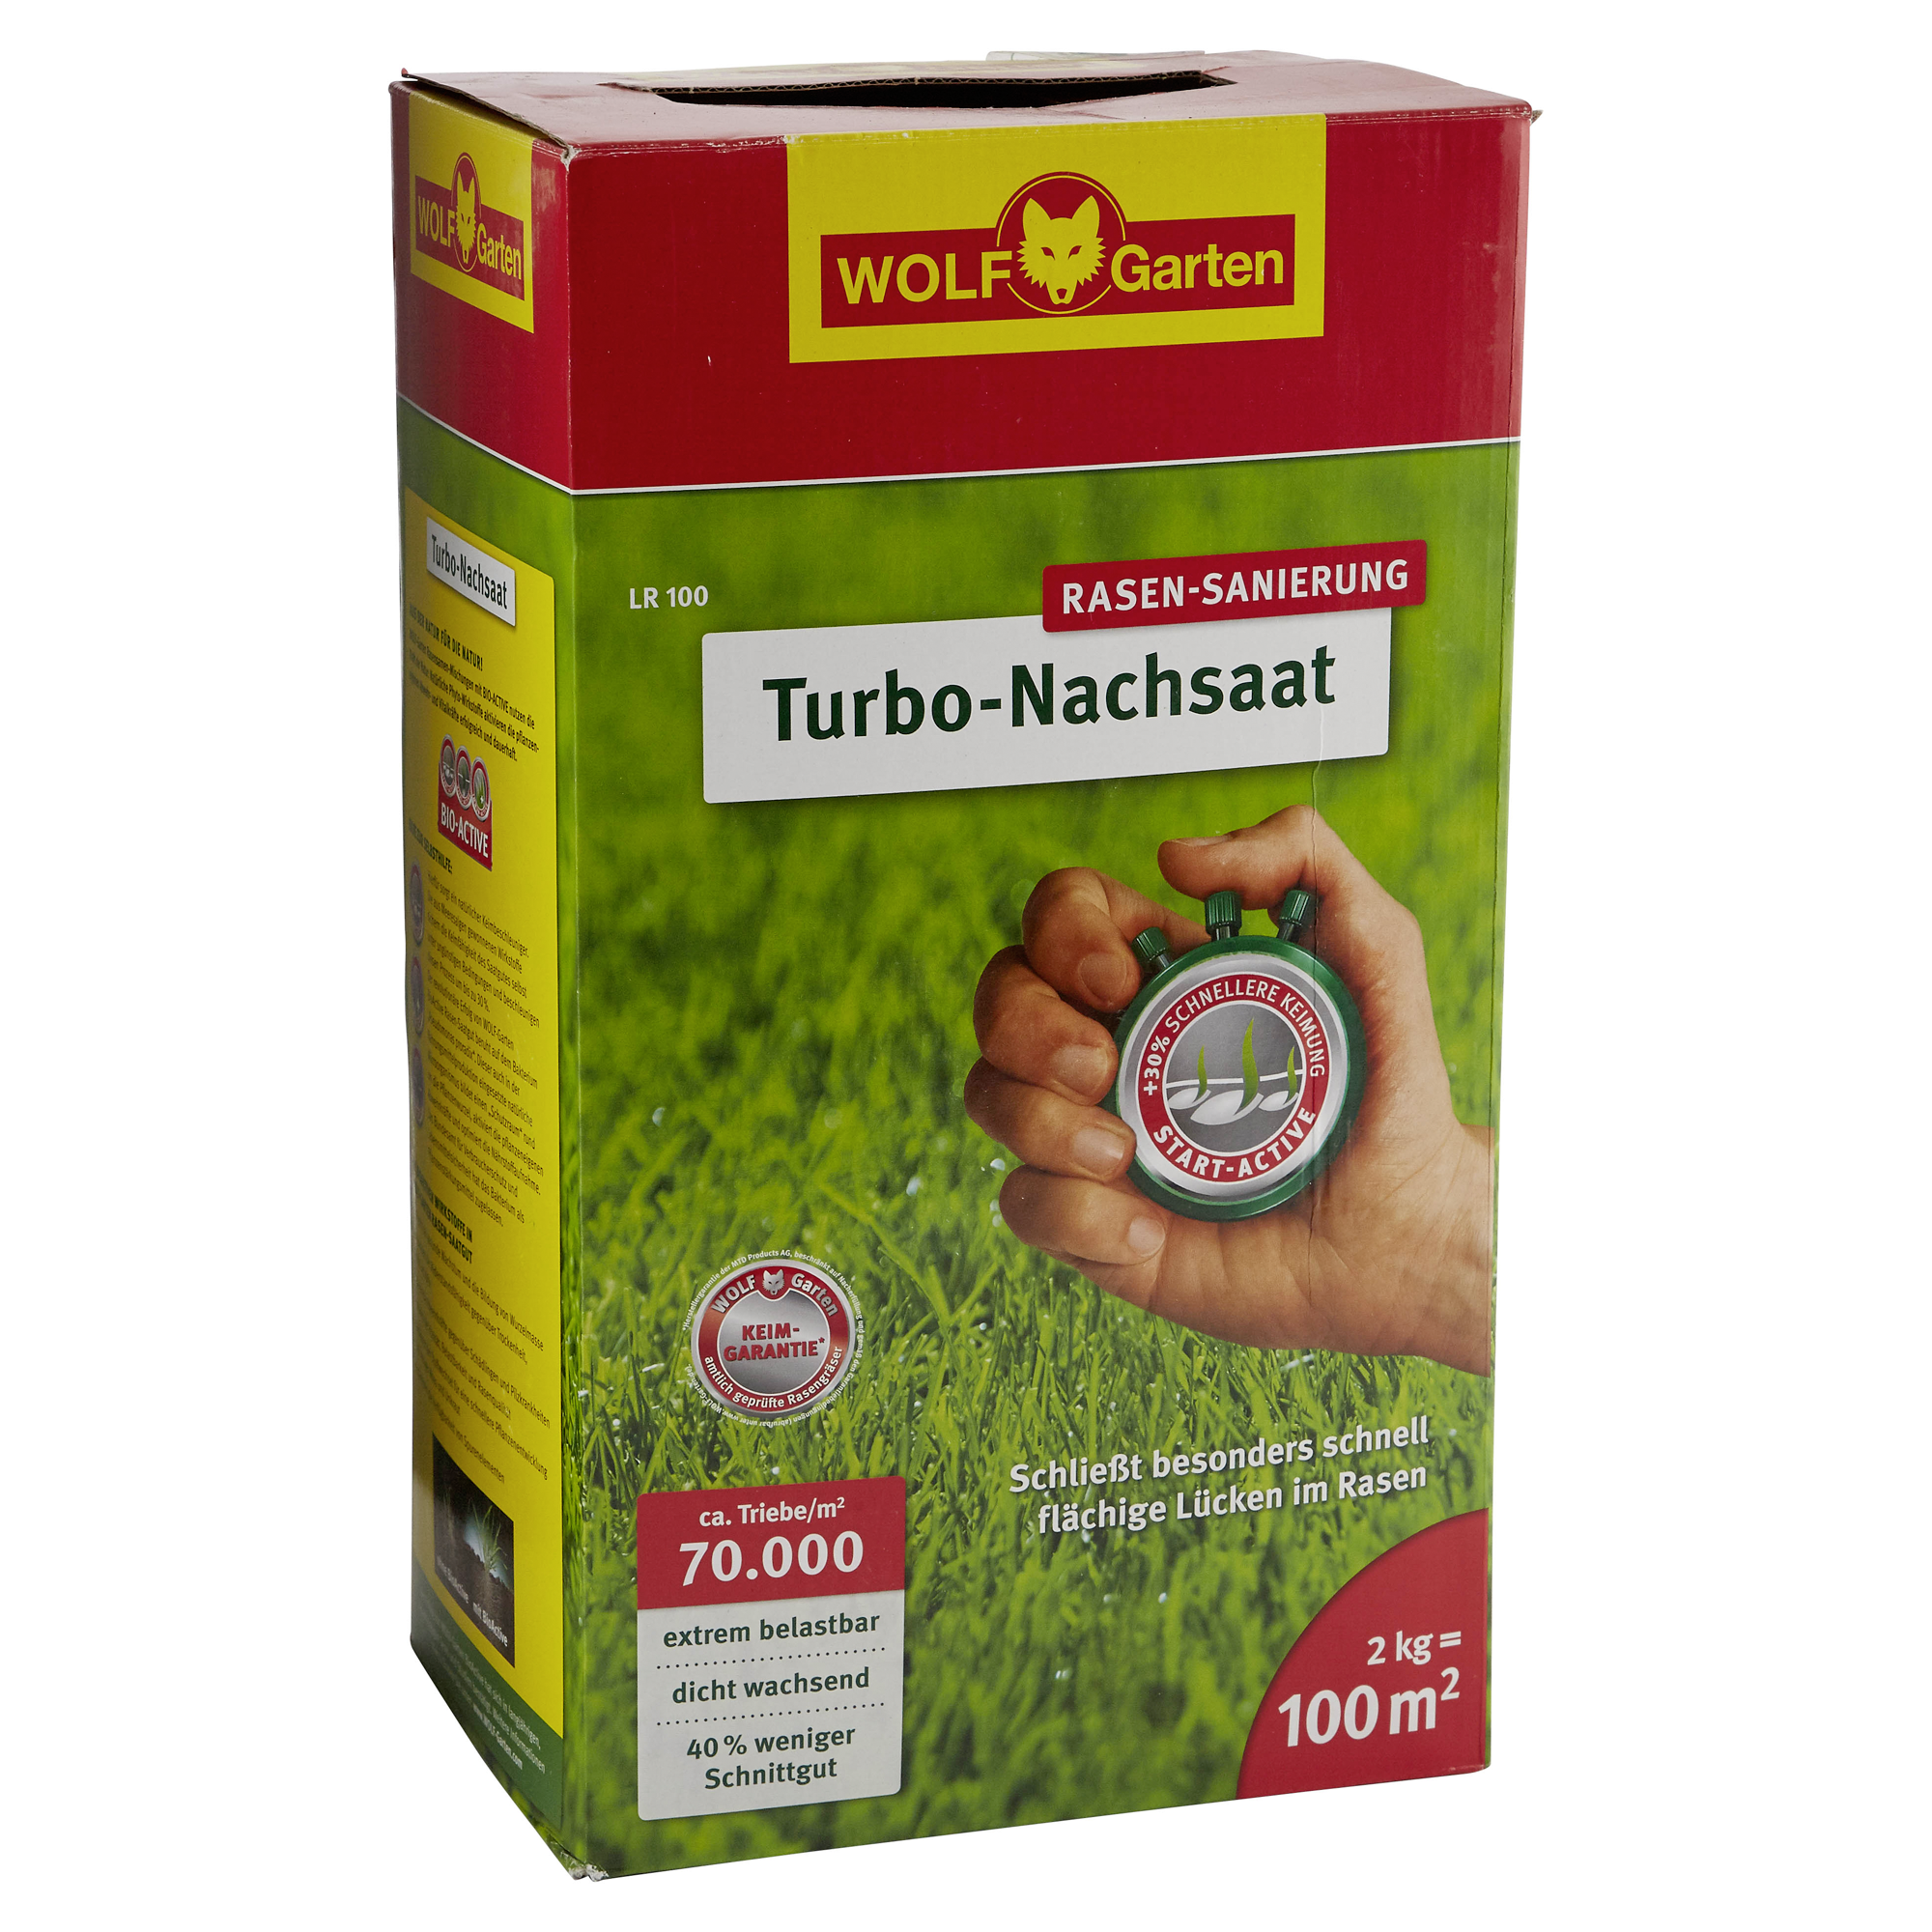 Turbo-Nachsaat 100 m² 2 kg + product picture